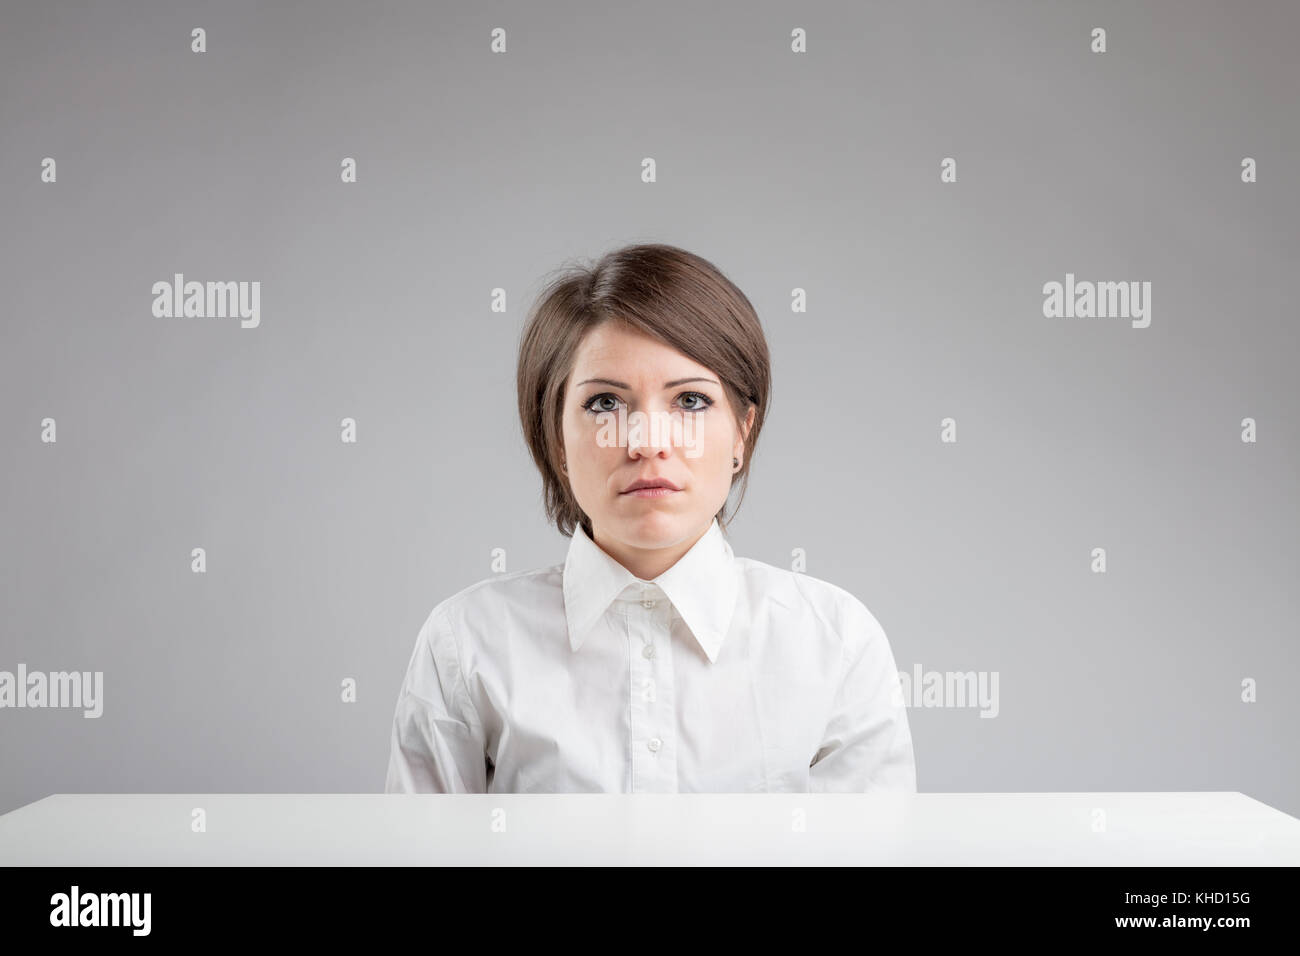 serious inexpressive woman portrait in front of an work table on a gray background with lots of copyspace Stock Photo